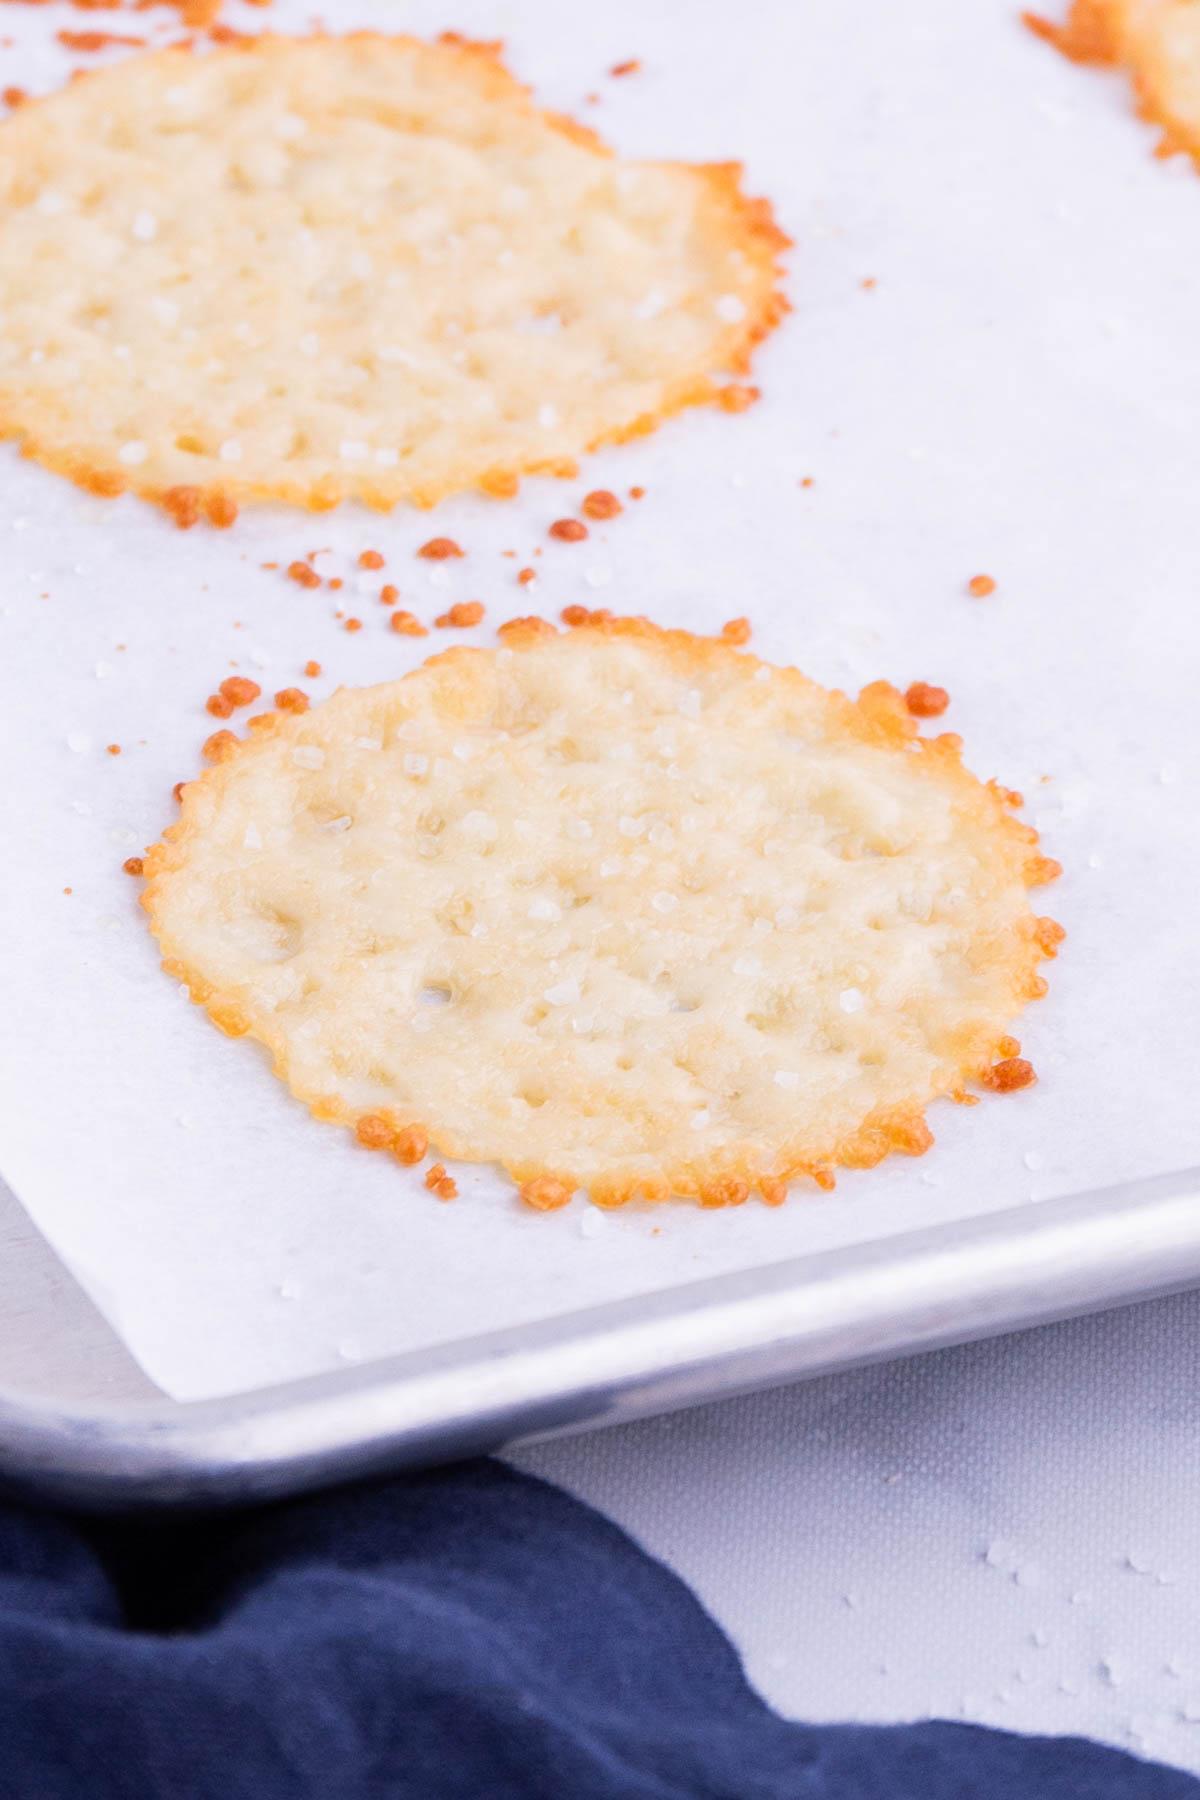 Parmesan crisps are baked on a cookie sheet.